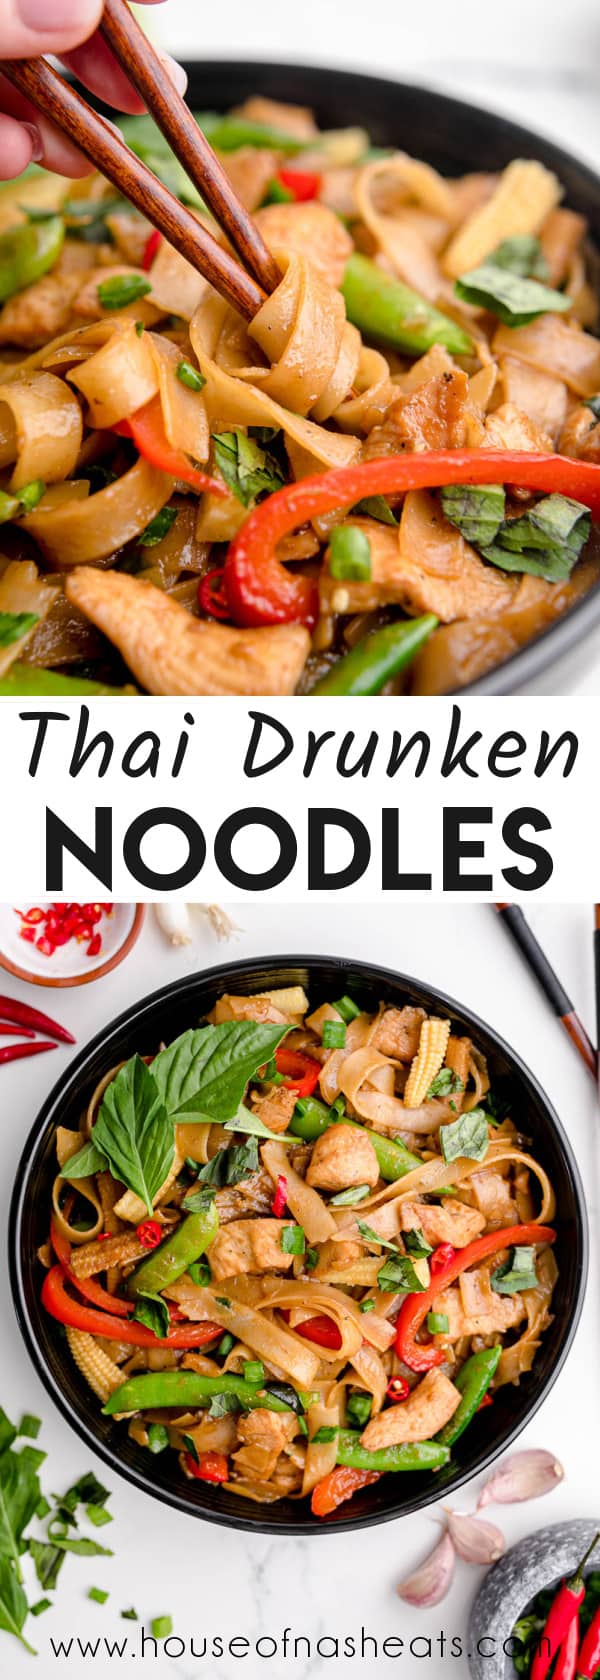 A collage of images of Thai drunken noodles with text overlay.